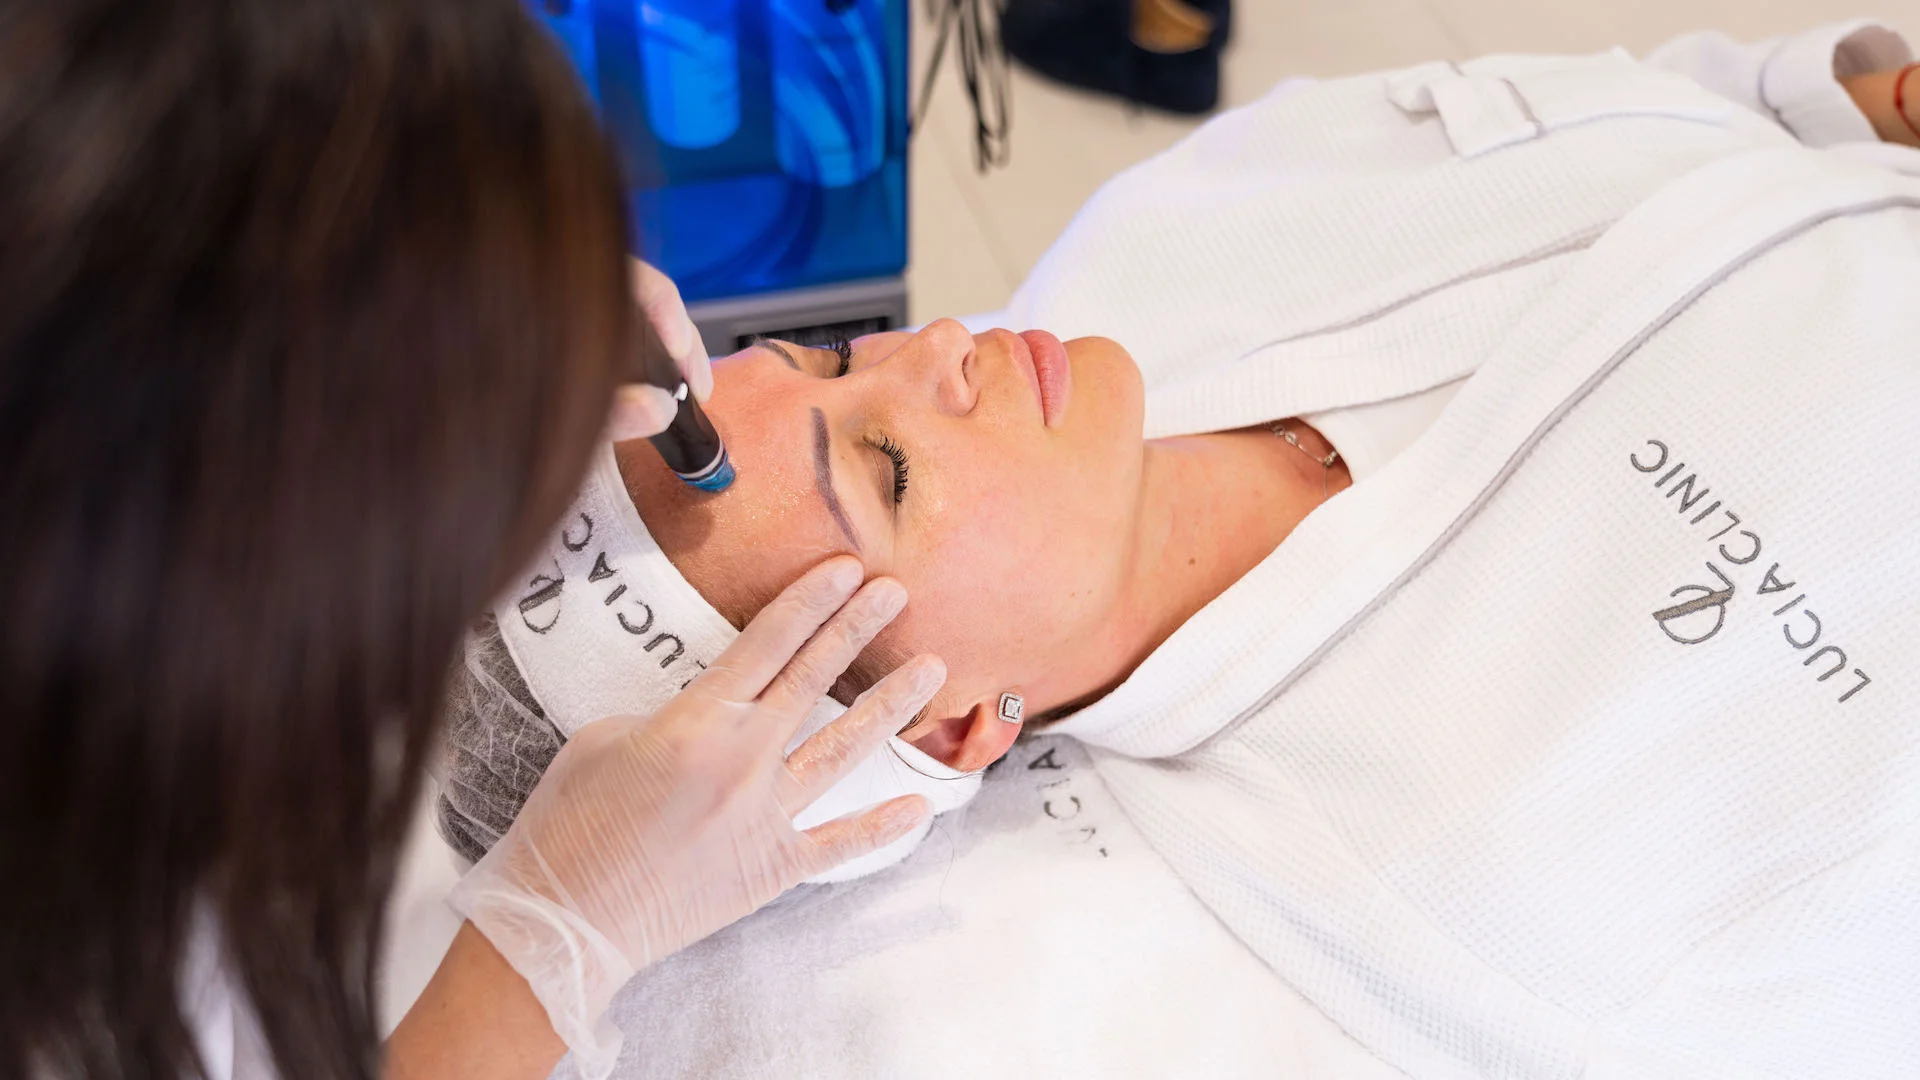 Facial treatments for safe non-invasive skin rejuvenation - cleanse, exfoliate and hydrate facial skin and reduce blemishes with different facial procedures.